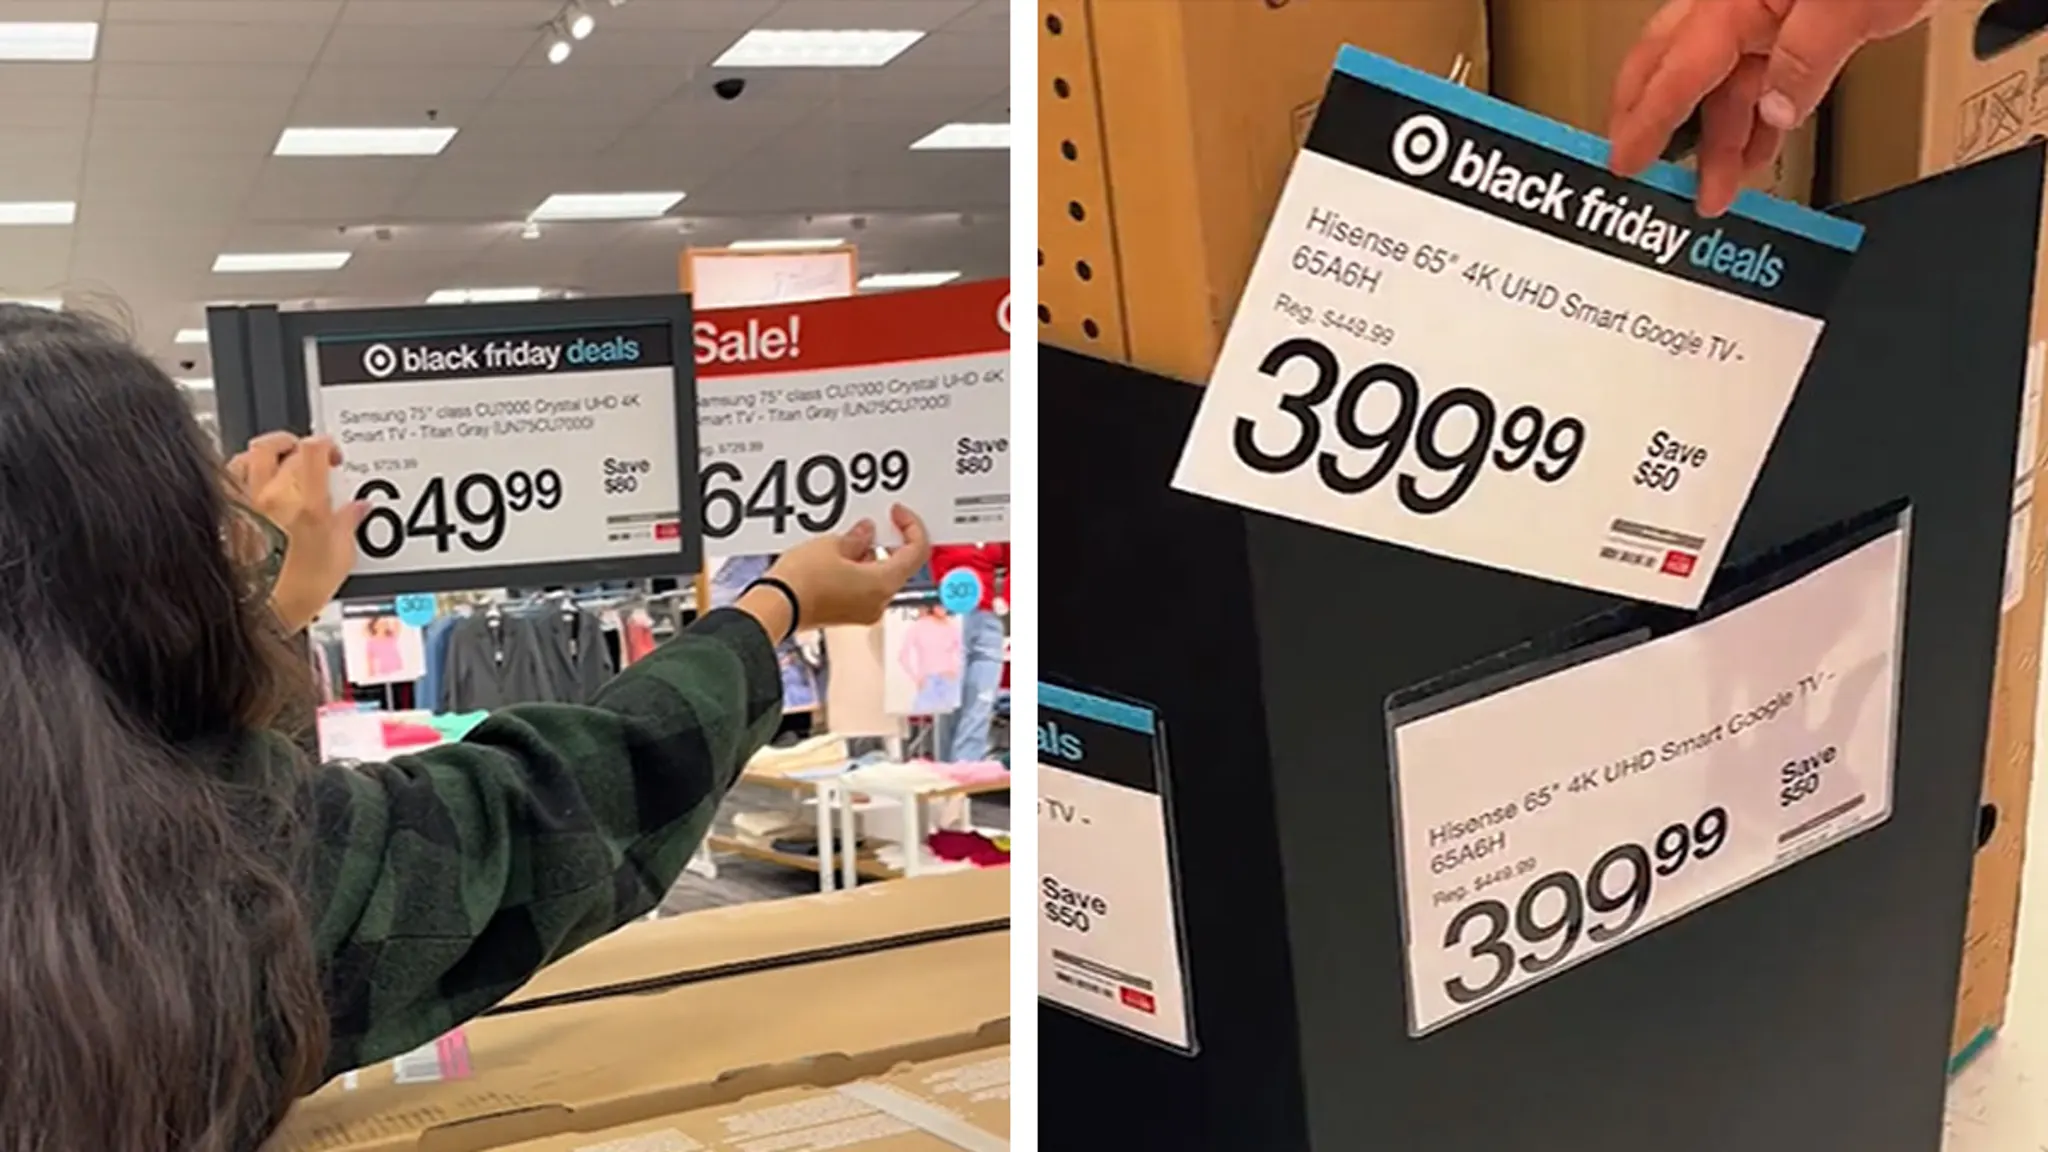 target-exposed-black-friday-signage-concealing-same-prices